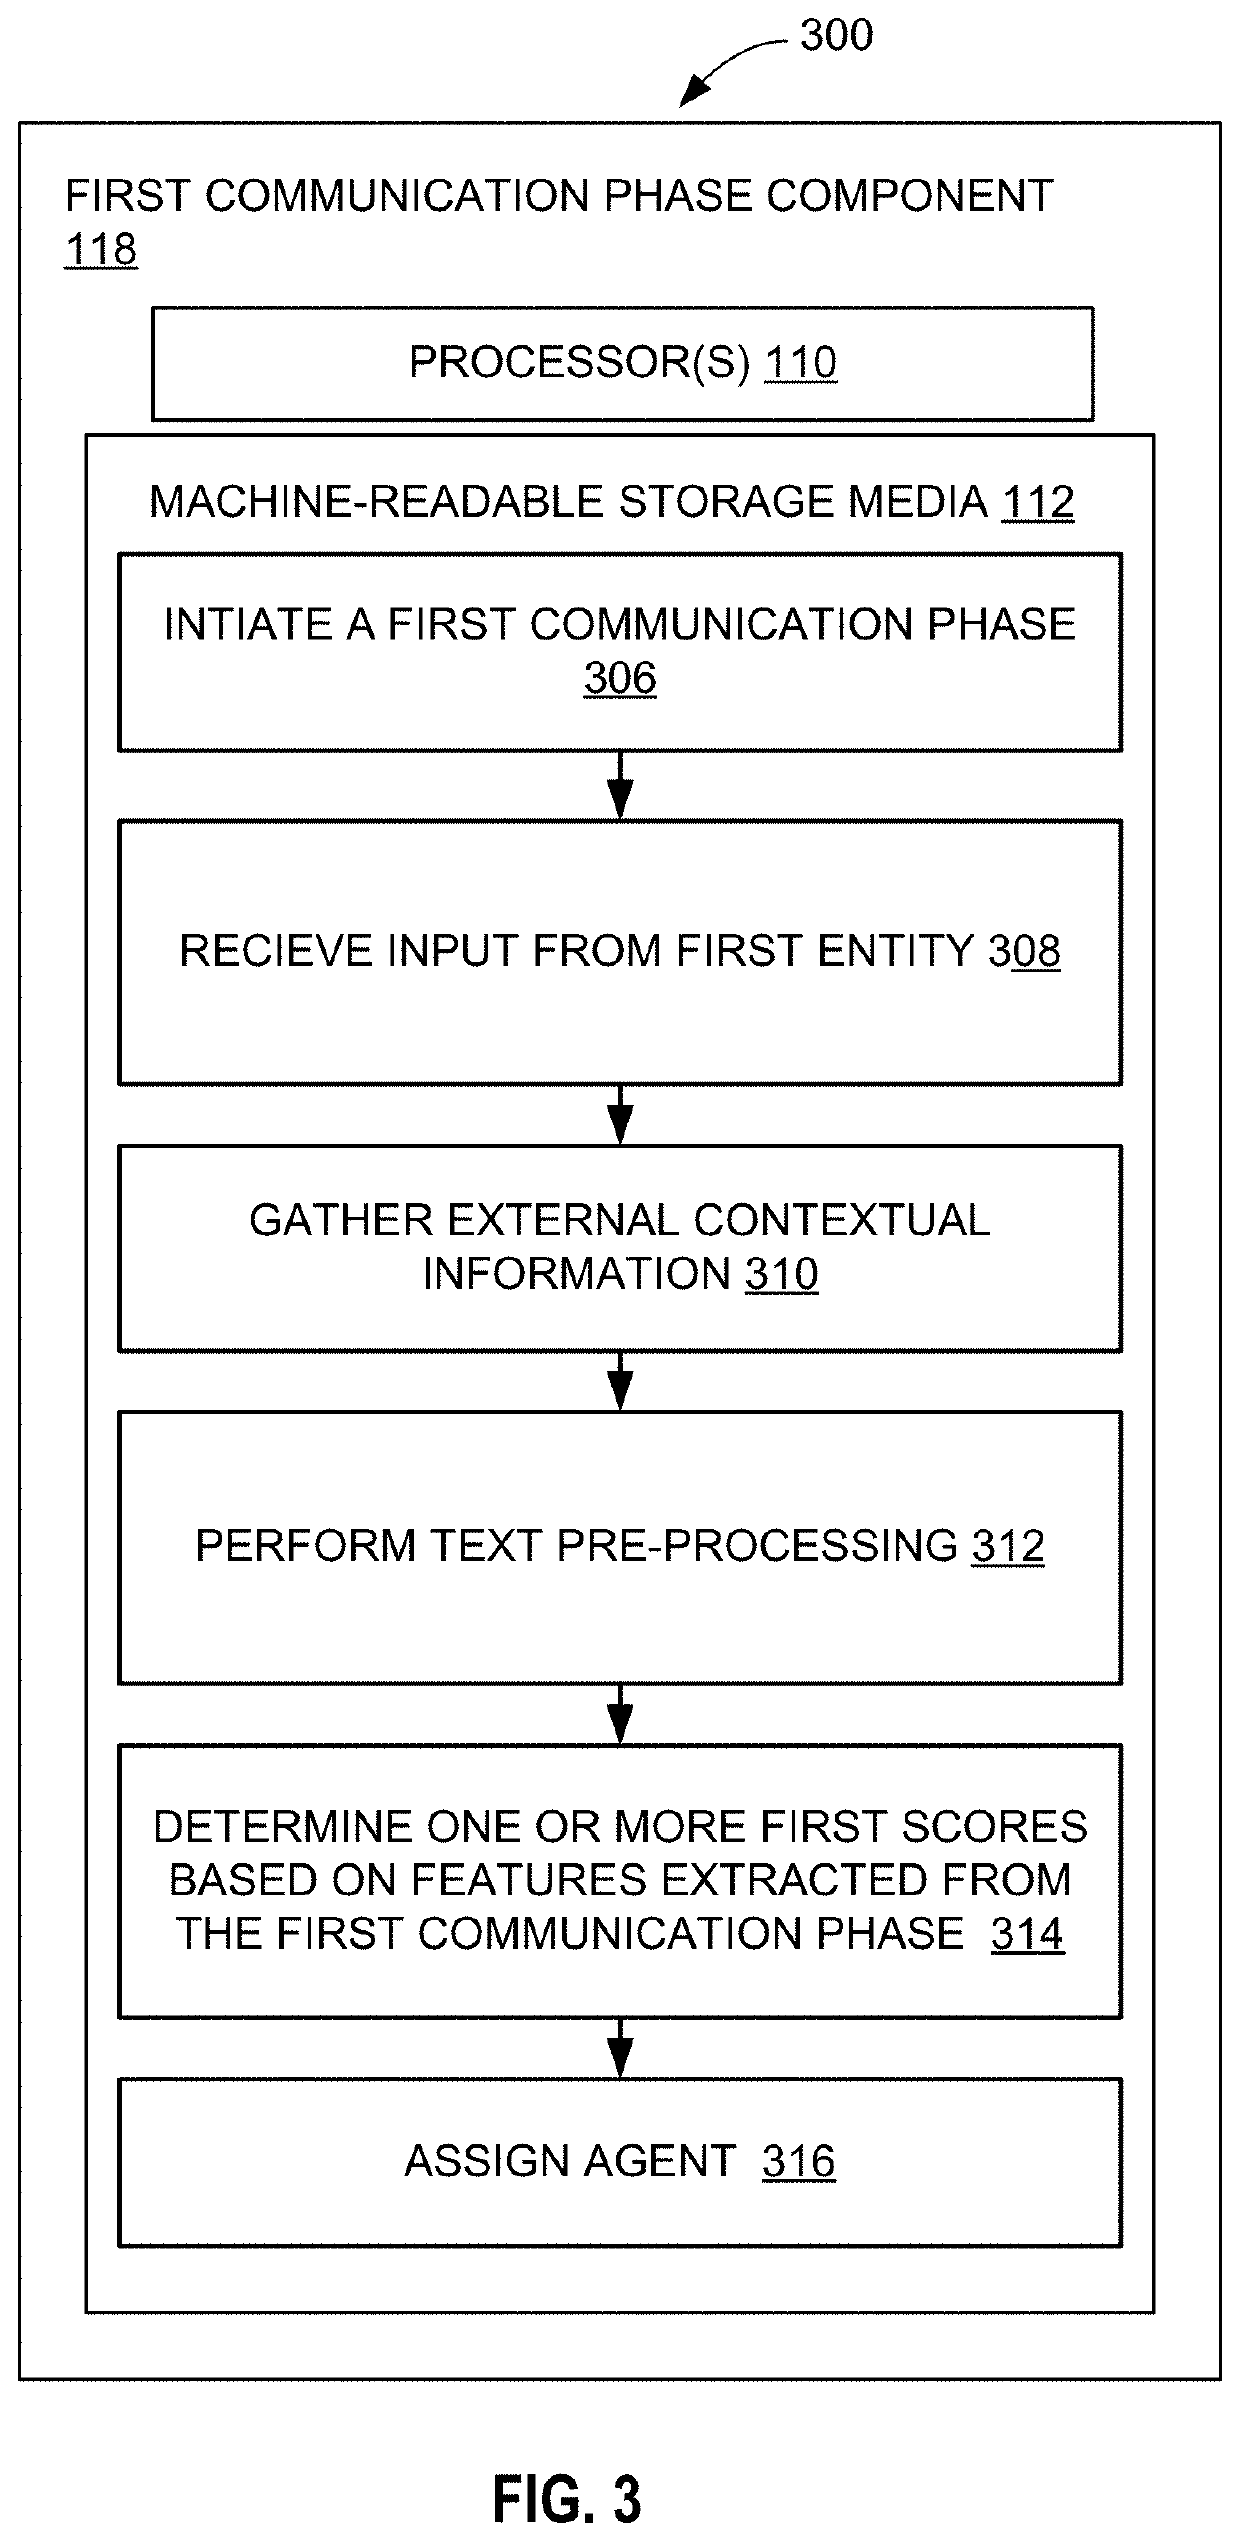 Systems and methods for predicting and optimizing the probability of an outcome event based on chat communication data